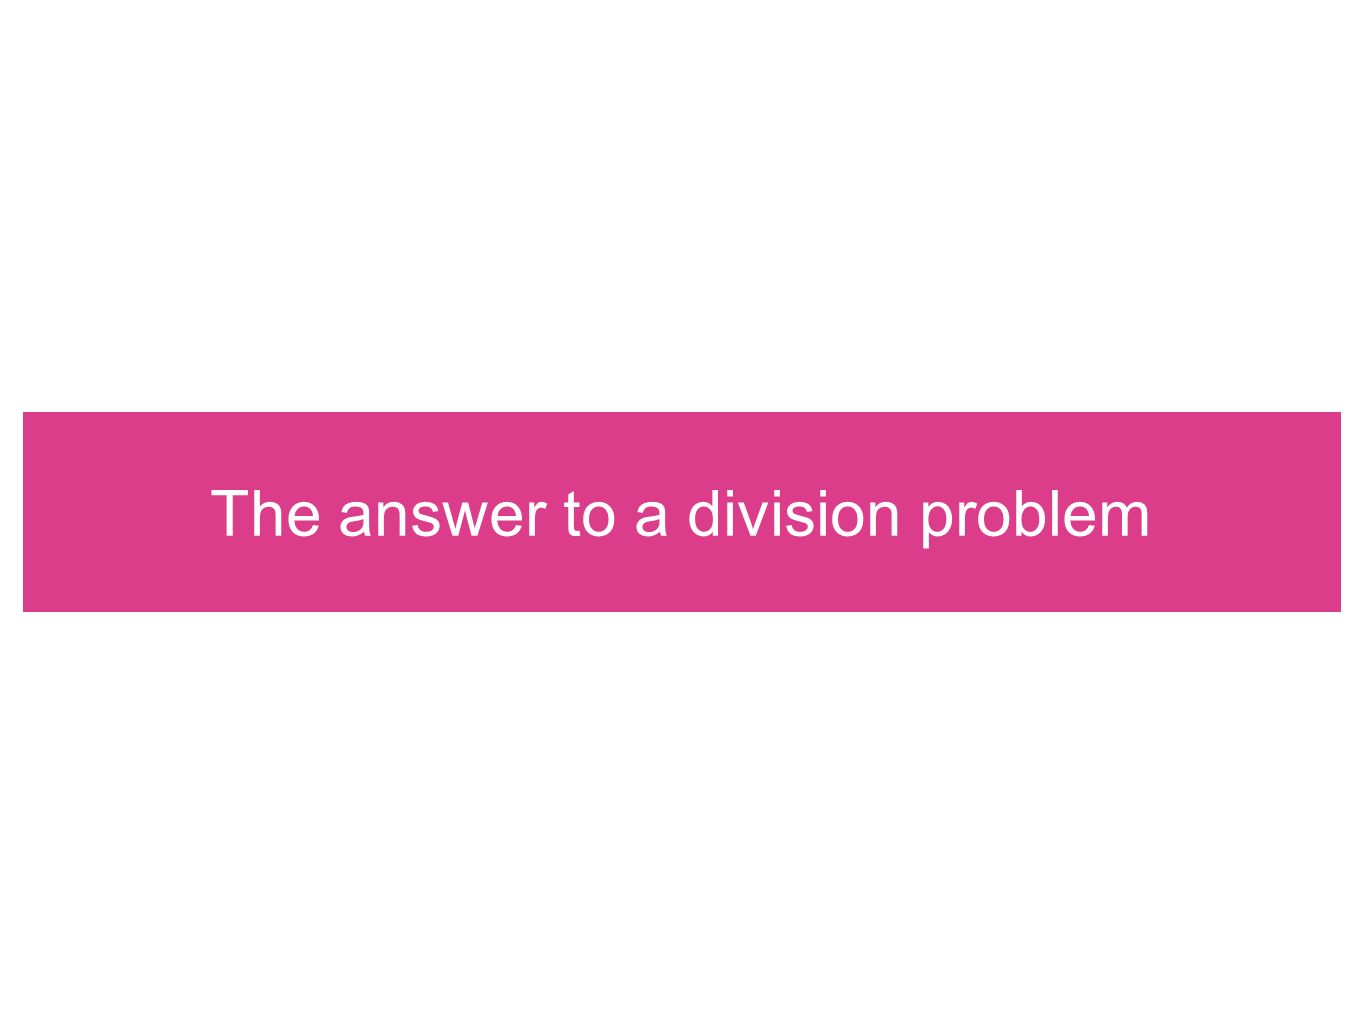 The answer to a division problem